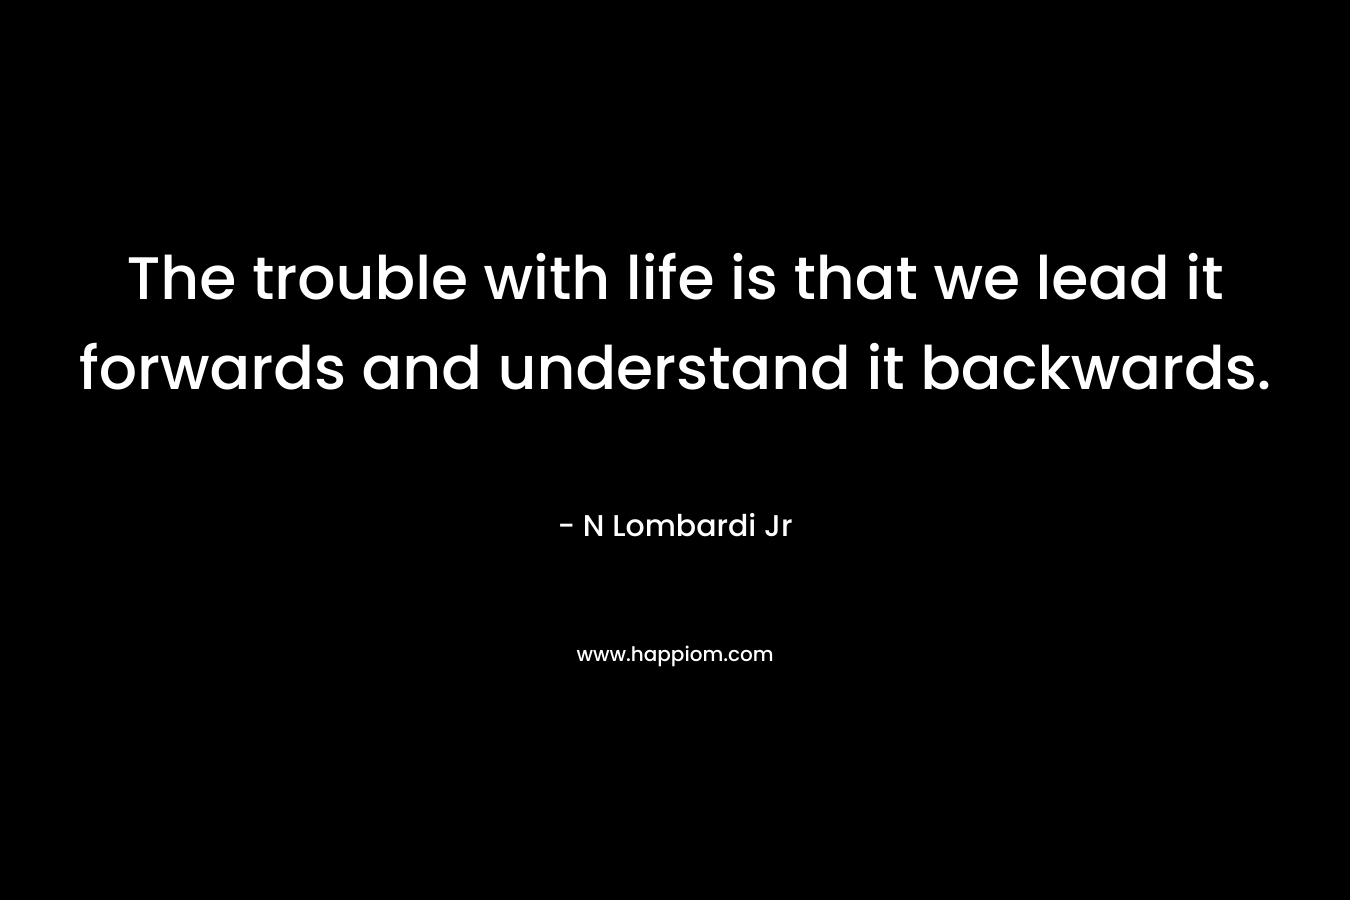 The trouble with life is that we lead it forwards and understand it backwards. – N Lombardi Jr